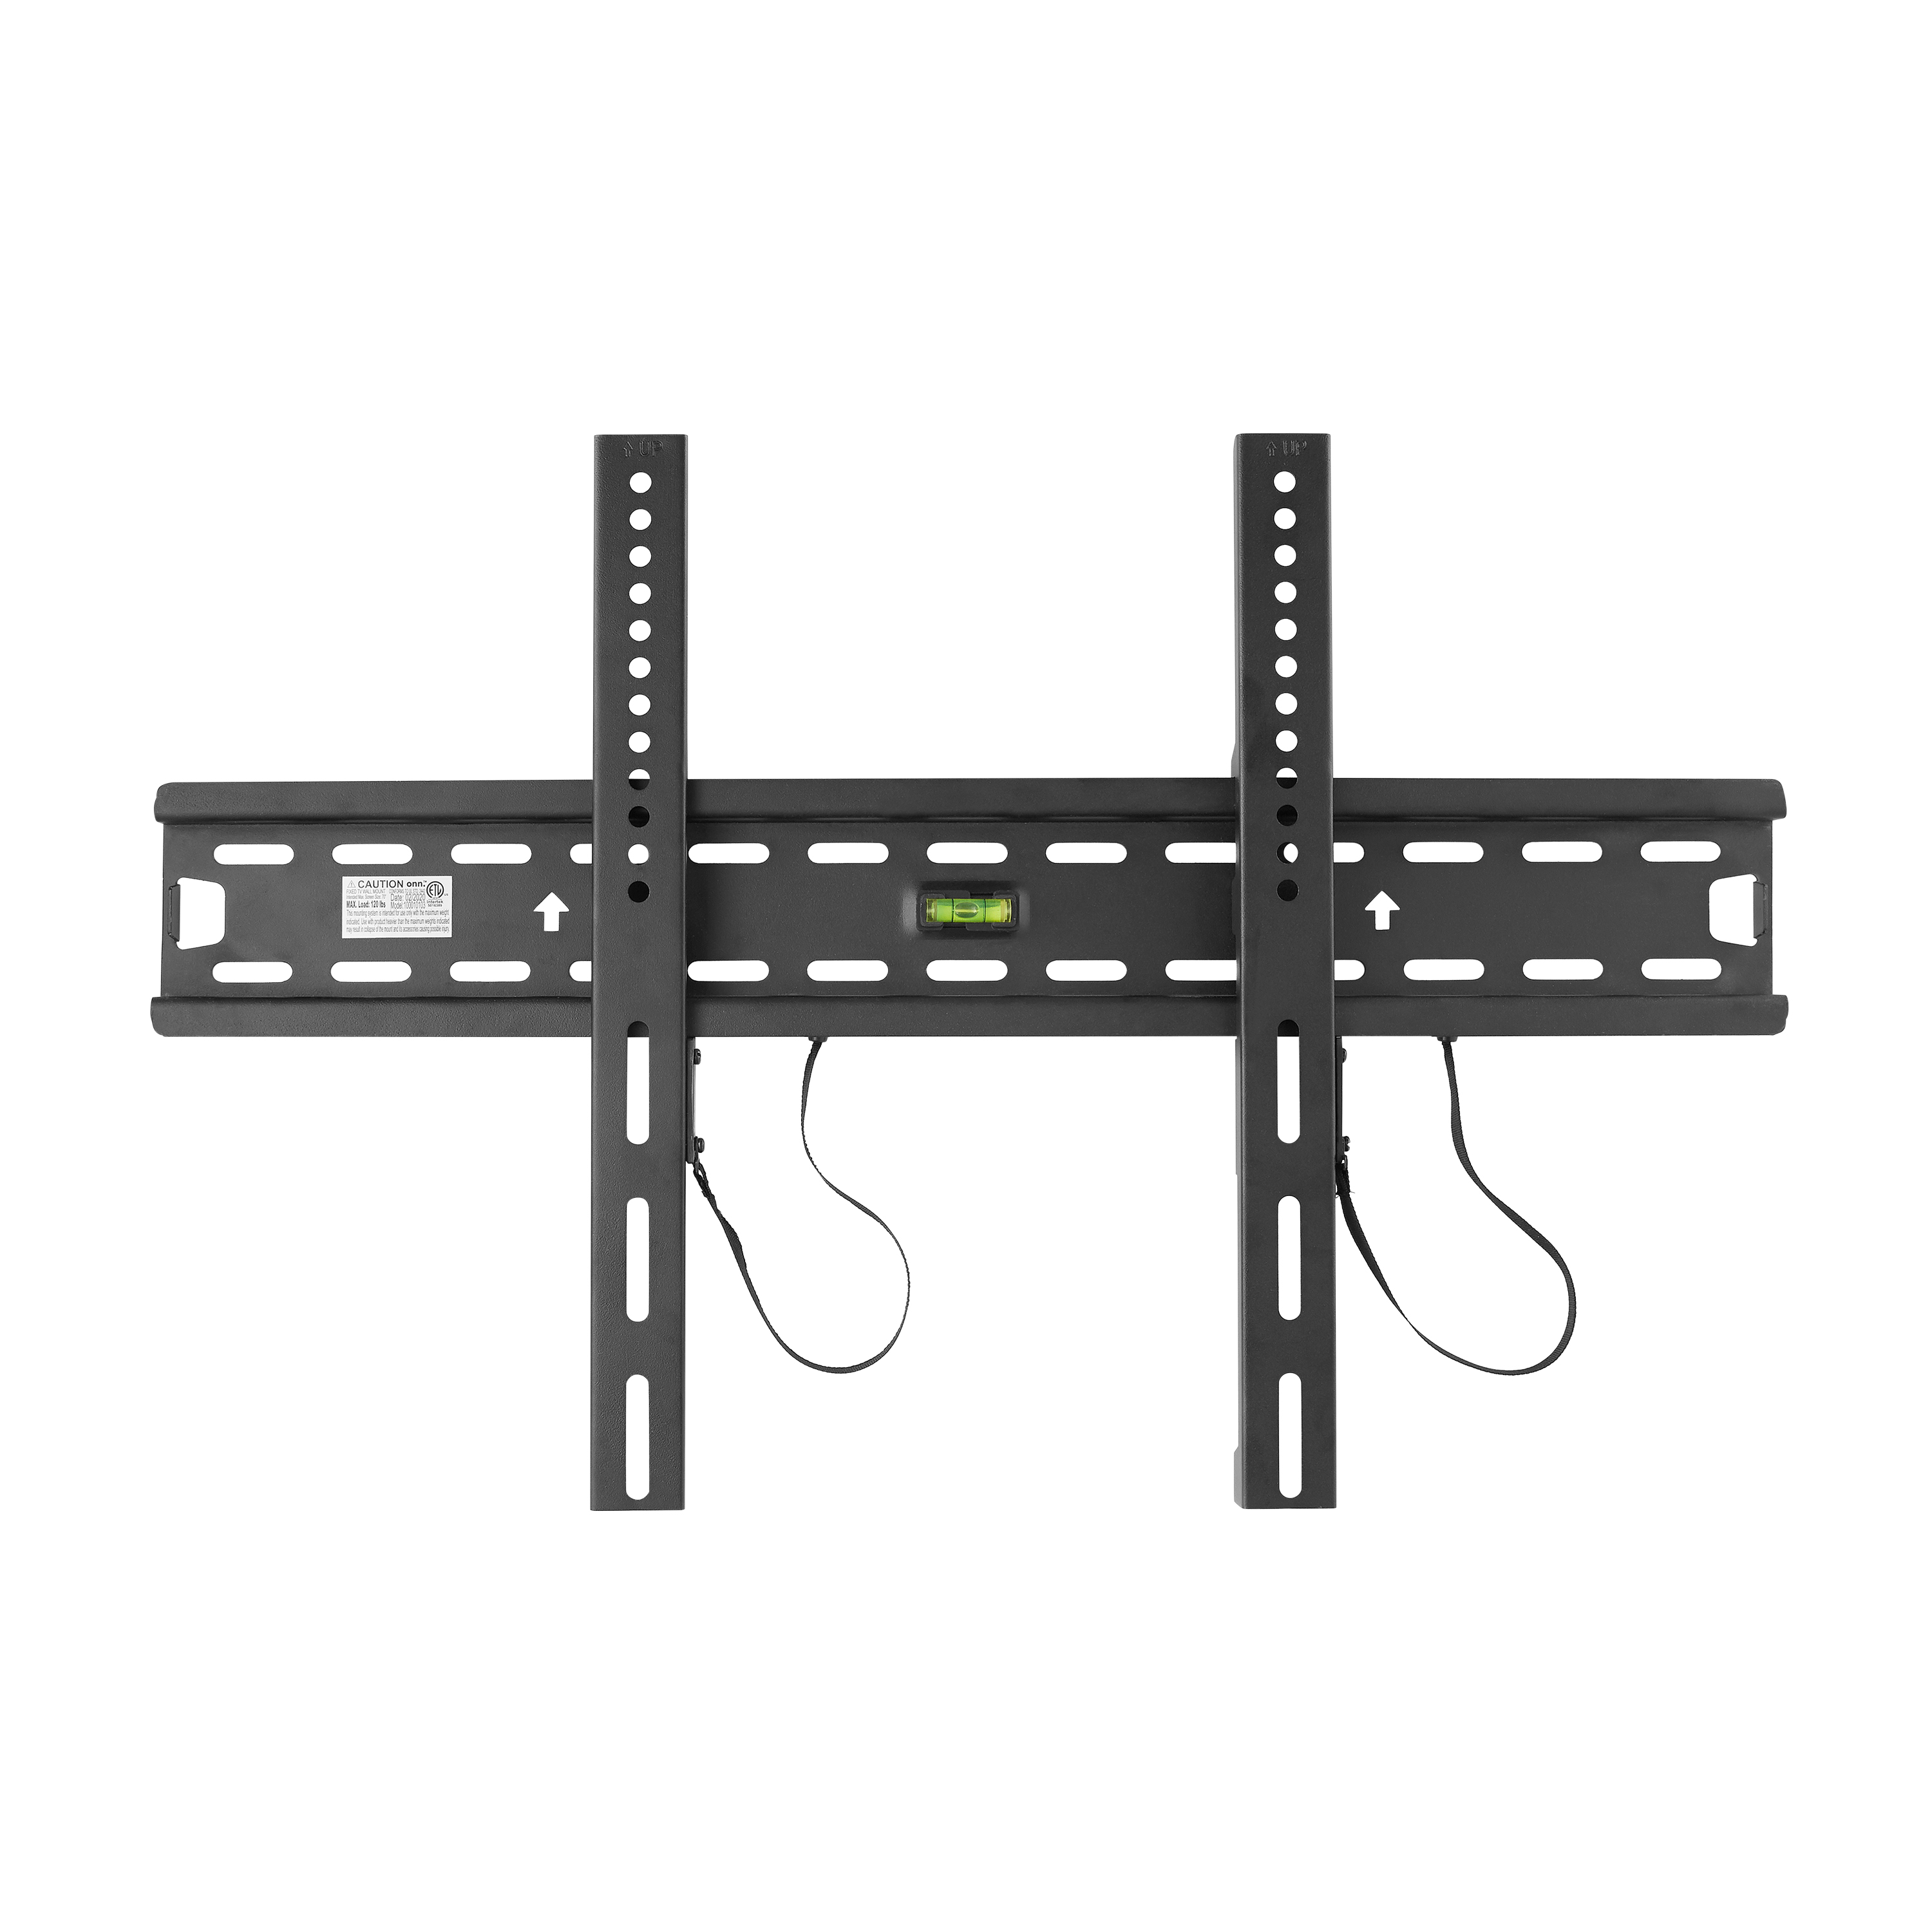 onn. Fixed TV Wall Mount for 32" to 86" TVs, holds up to 120 lbs - image 4 of 13